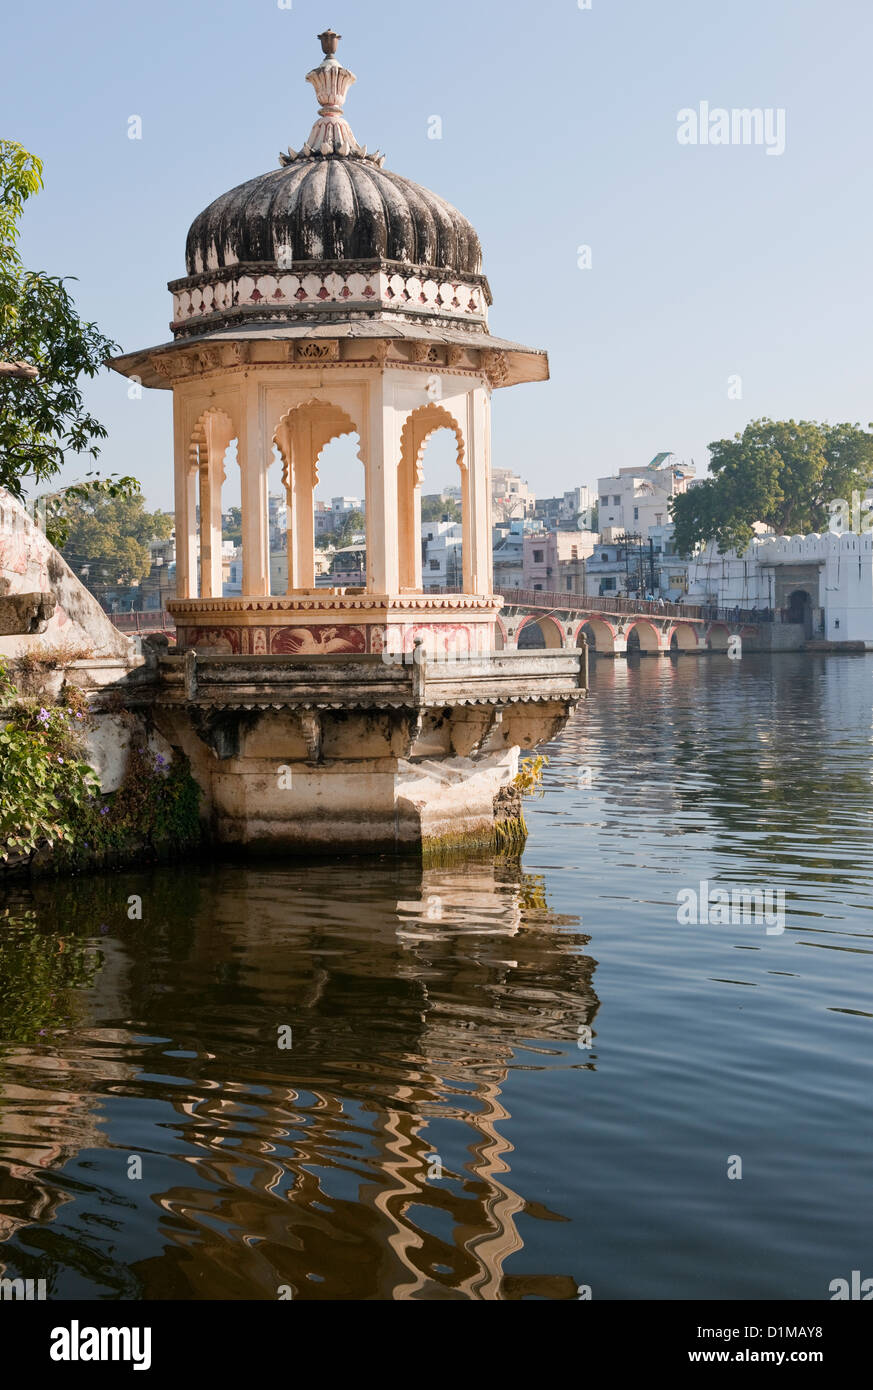 Detail of local architecture on Lake Pichola in Udaipur Rajasthan India with reflections in the water Stock Photo